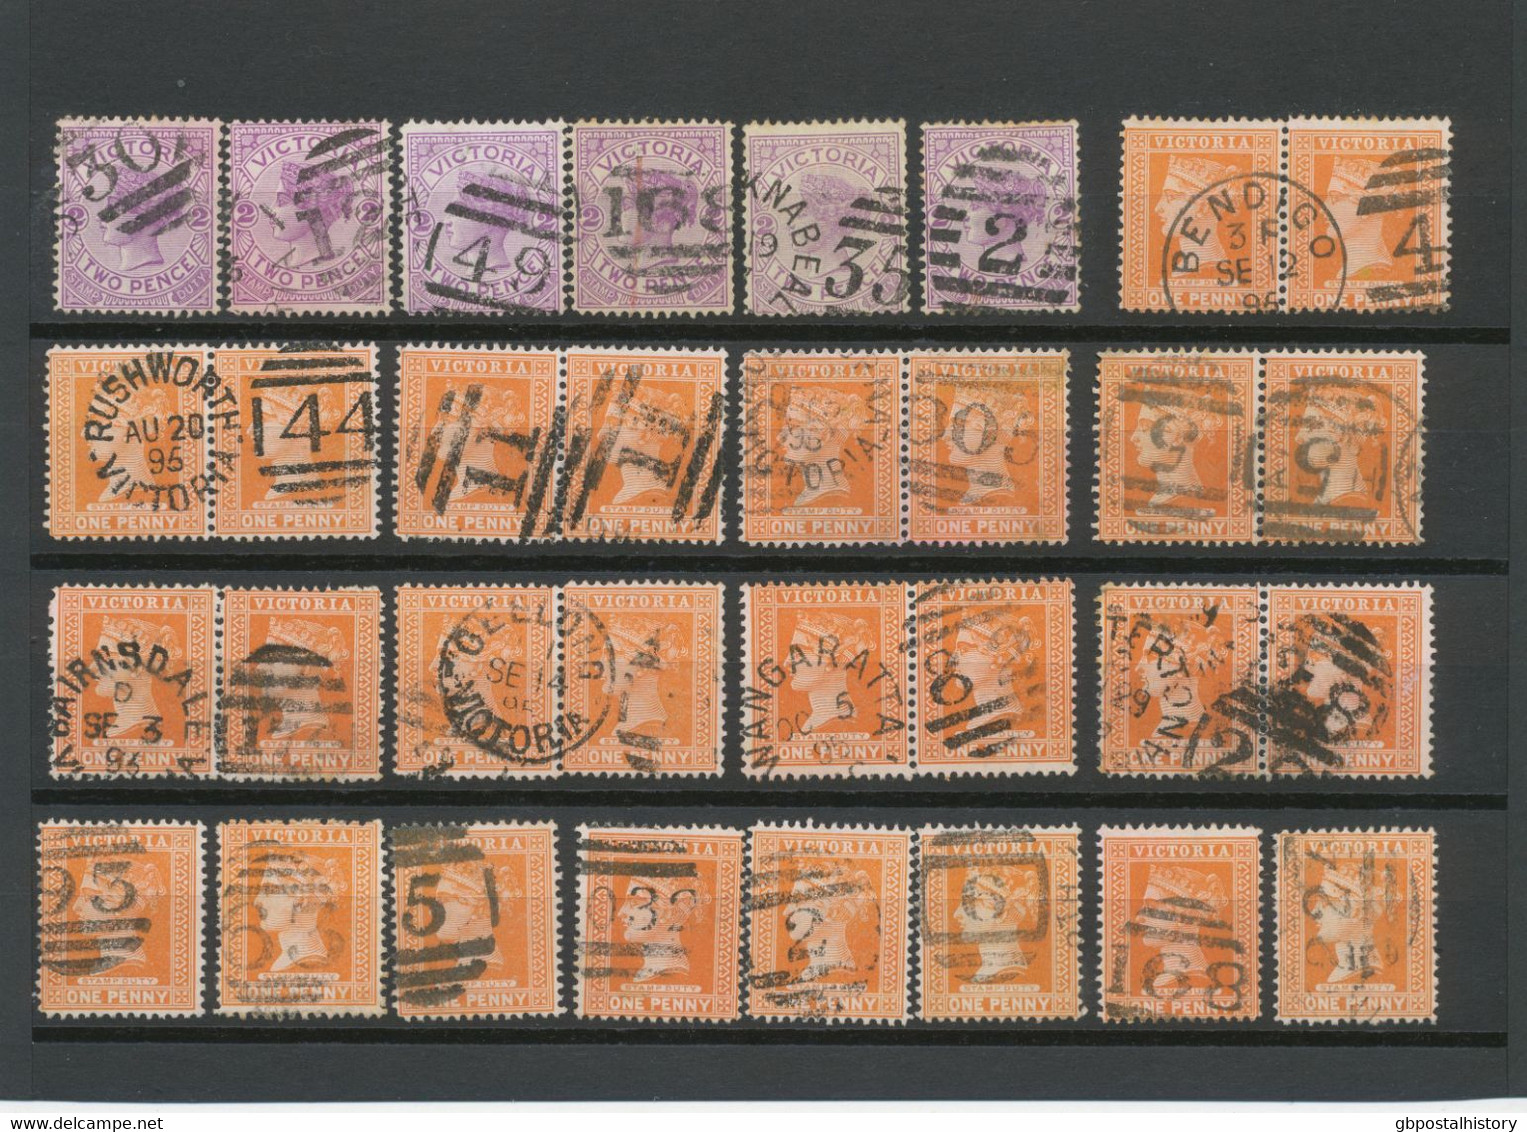 COLLECTION AUSTRALIA OF CLASSIC POSTMARKS (NUMERALS, DUPLEX, TPO (Railway), R (Registered) And Some Others) Ca. 1880/190 - Verzamelingen